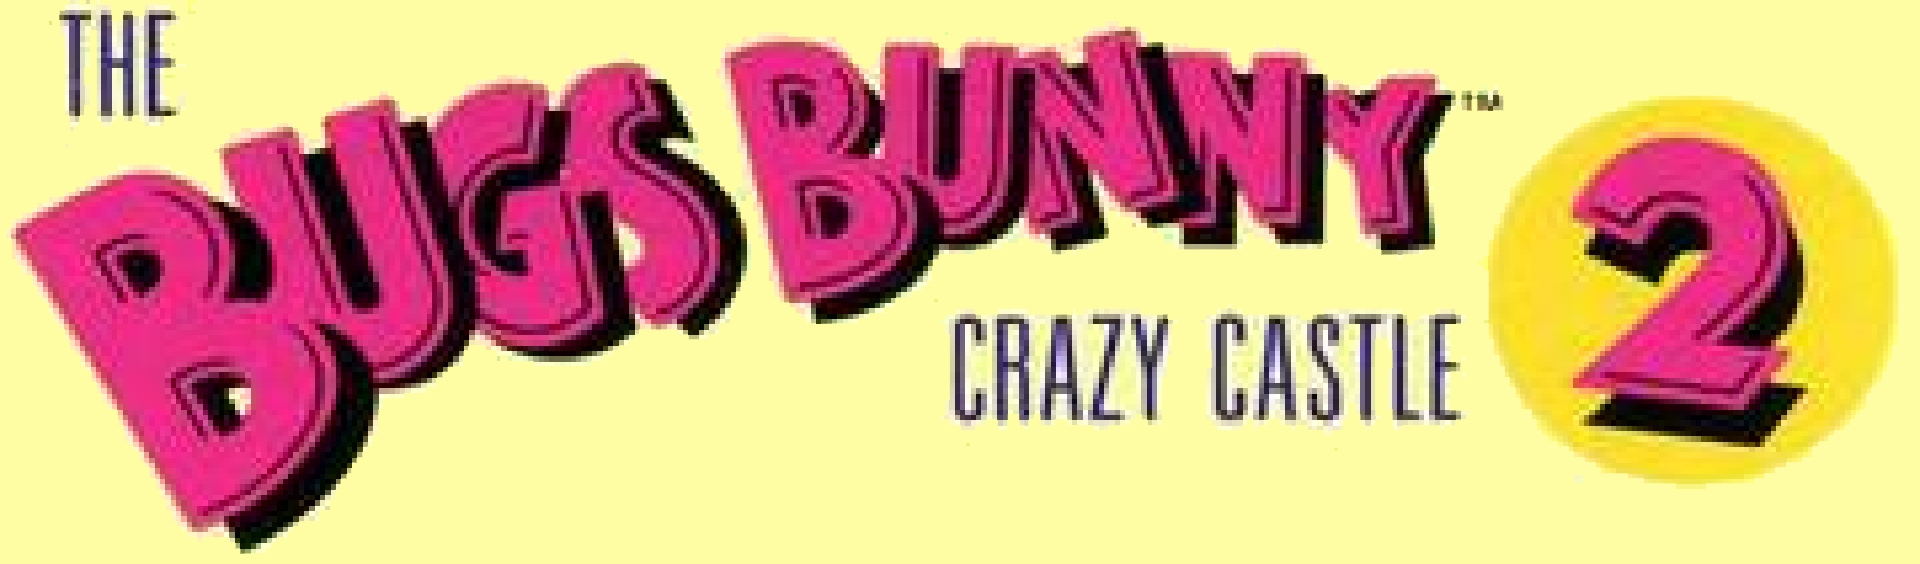 Banner The Bugs Bunny Crazy Castle 2